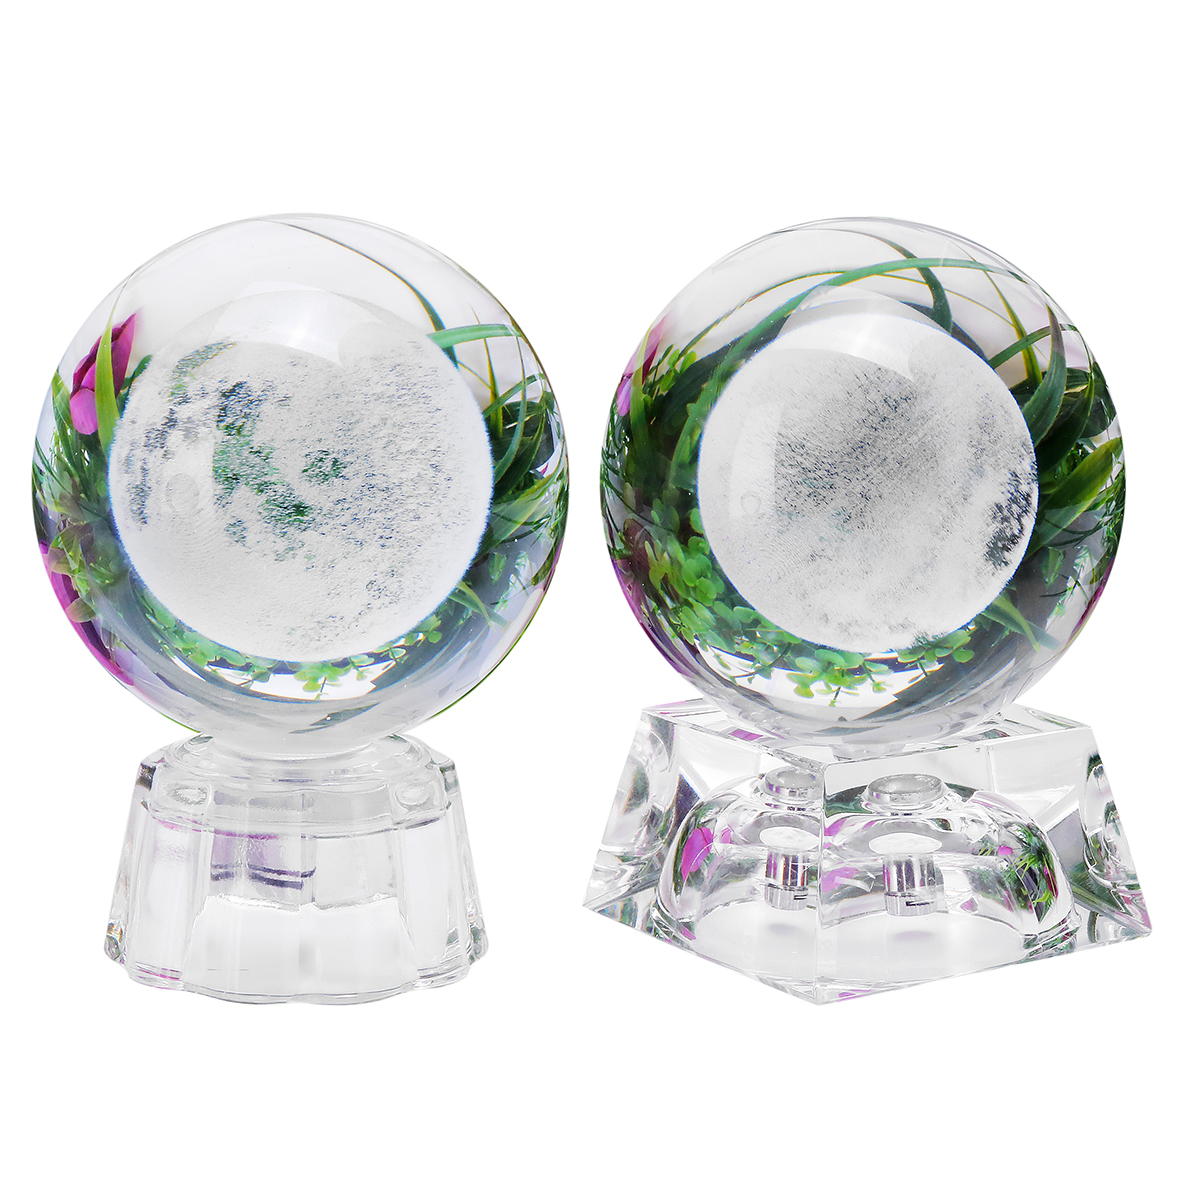 Moon-Crystal-Ball-With-Light-Effect-Base-3D-Engraving-Colorful-Ornaments-Crafts-Desktop-Decorations-1423887-2